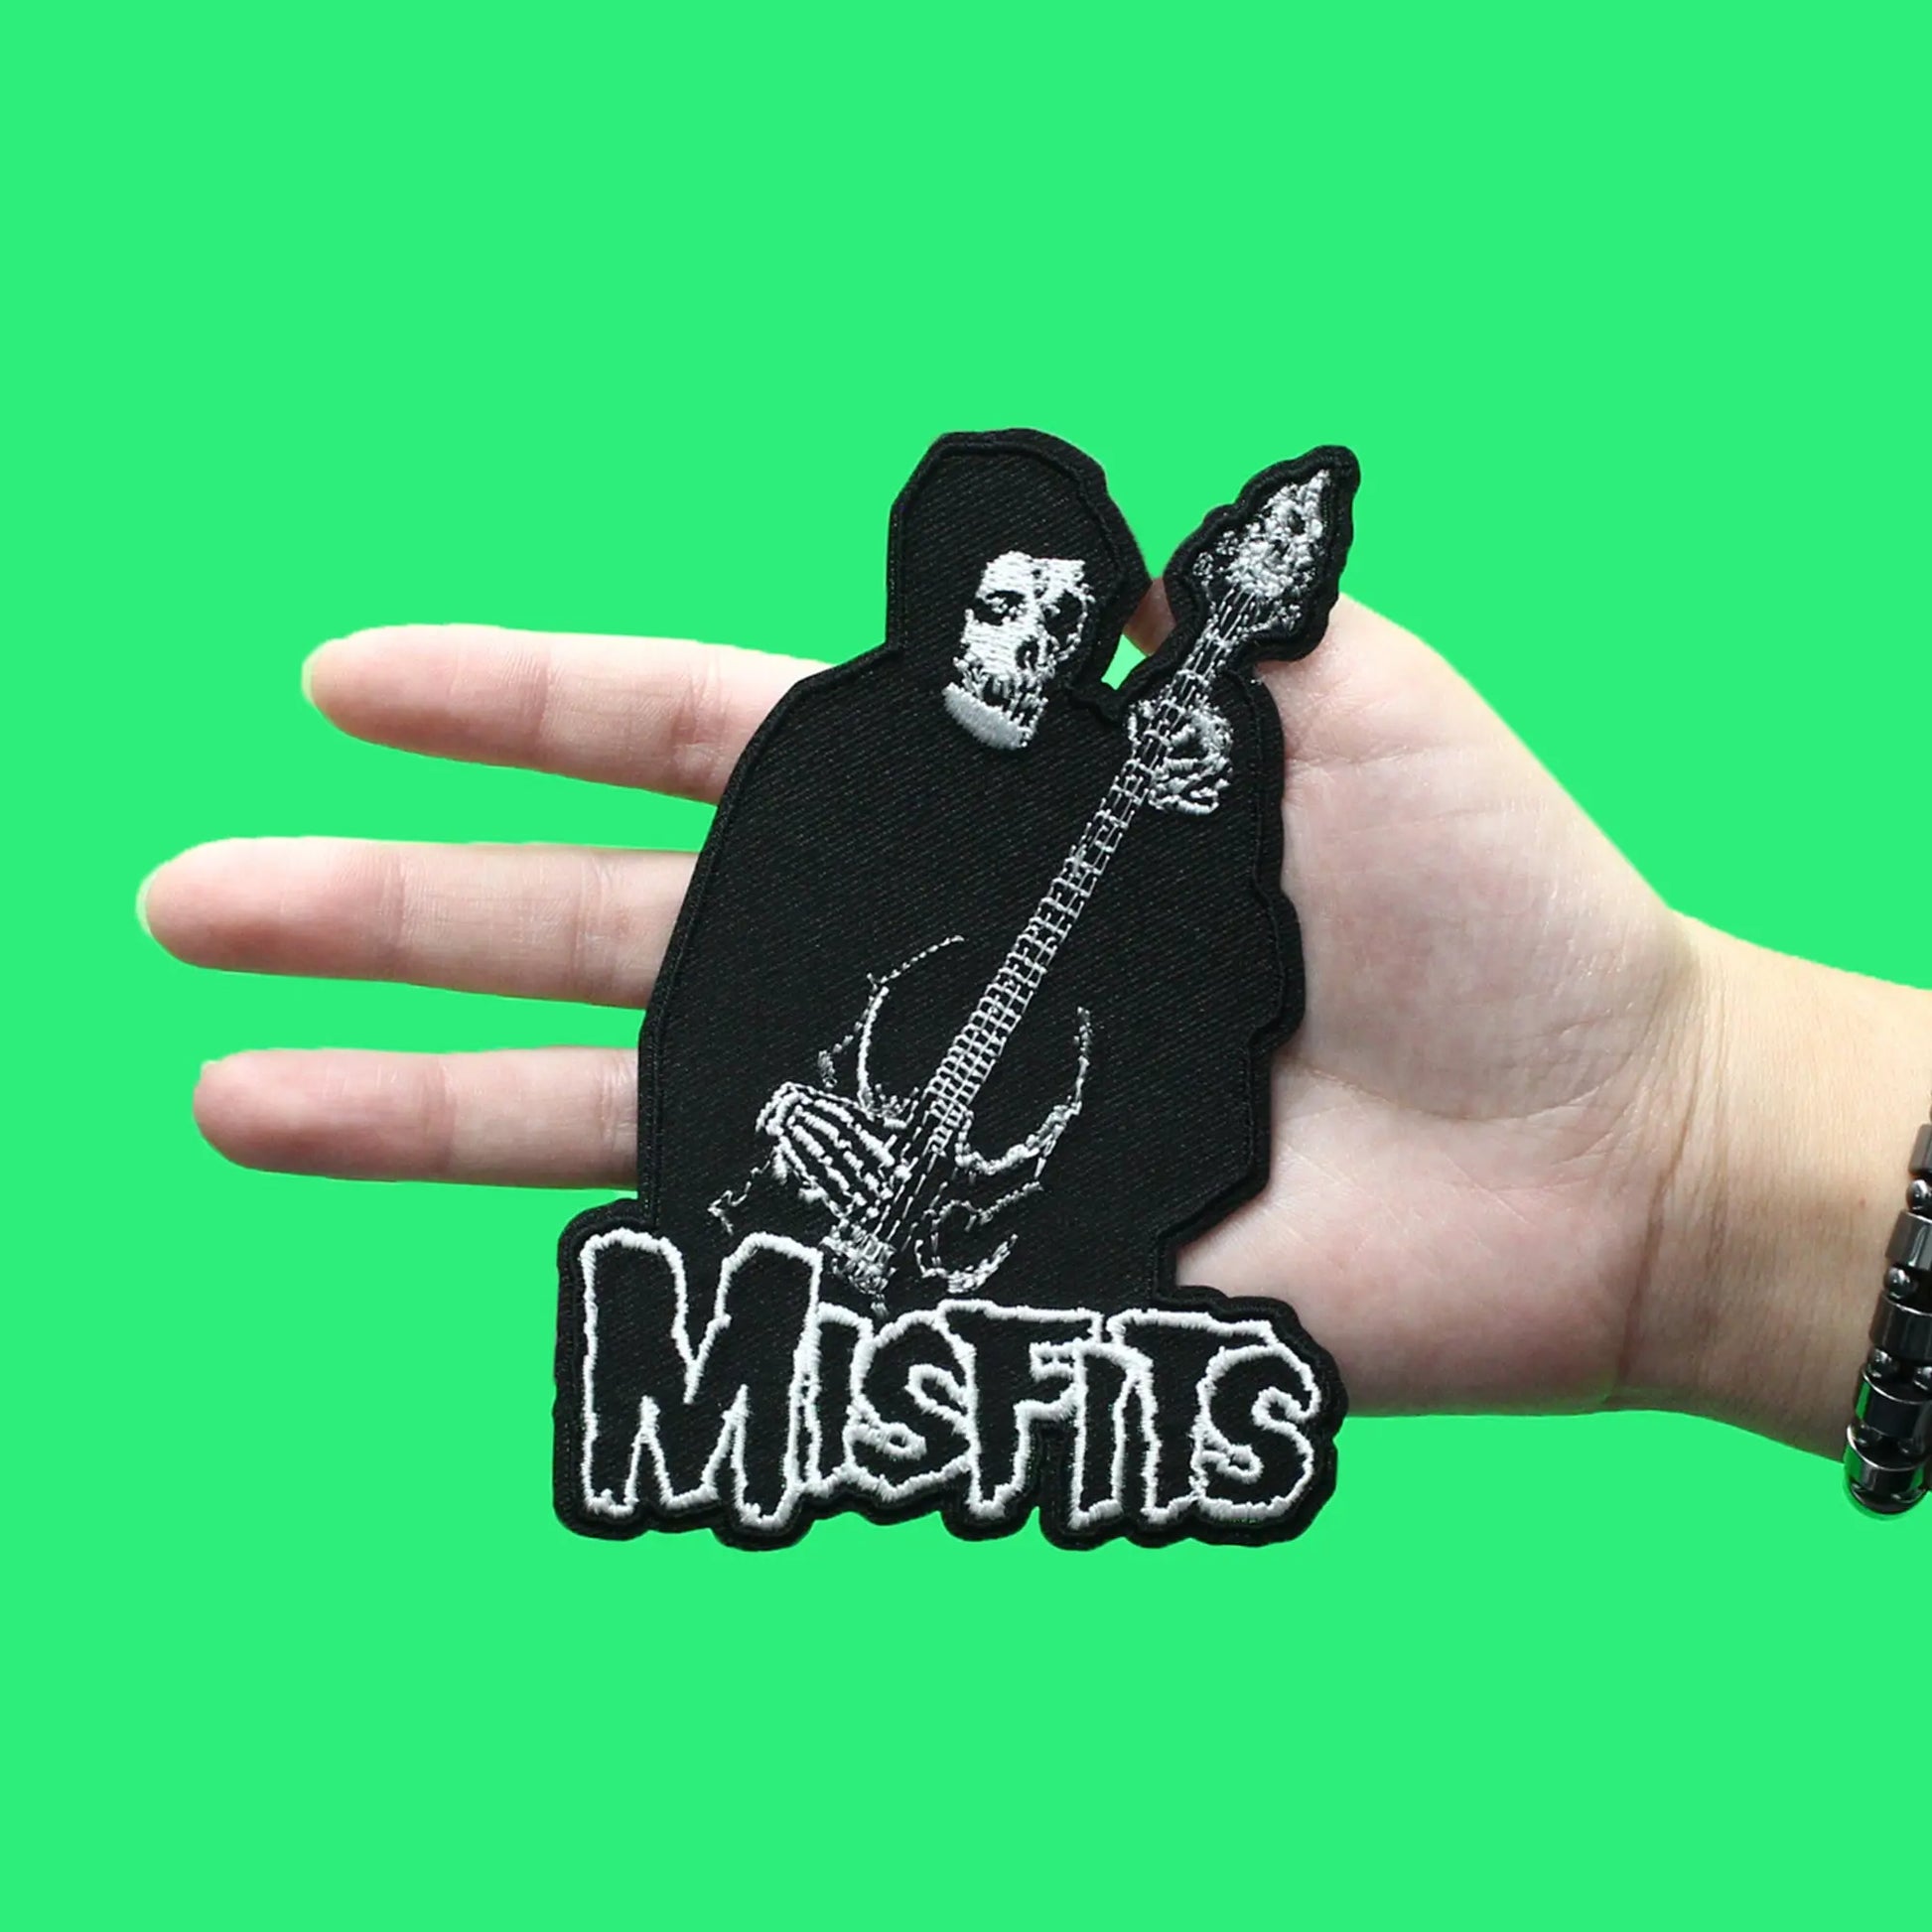 Misfits Bass Fiend Patch Classic Punk Rock Embroidered Iron On